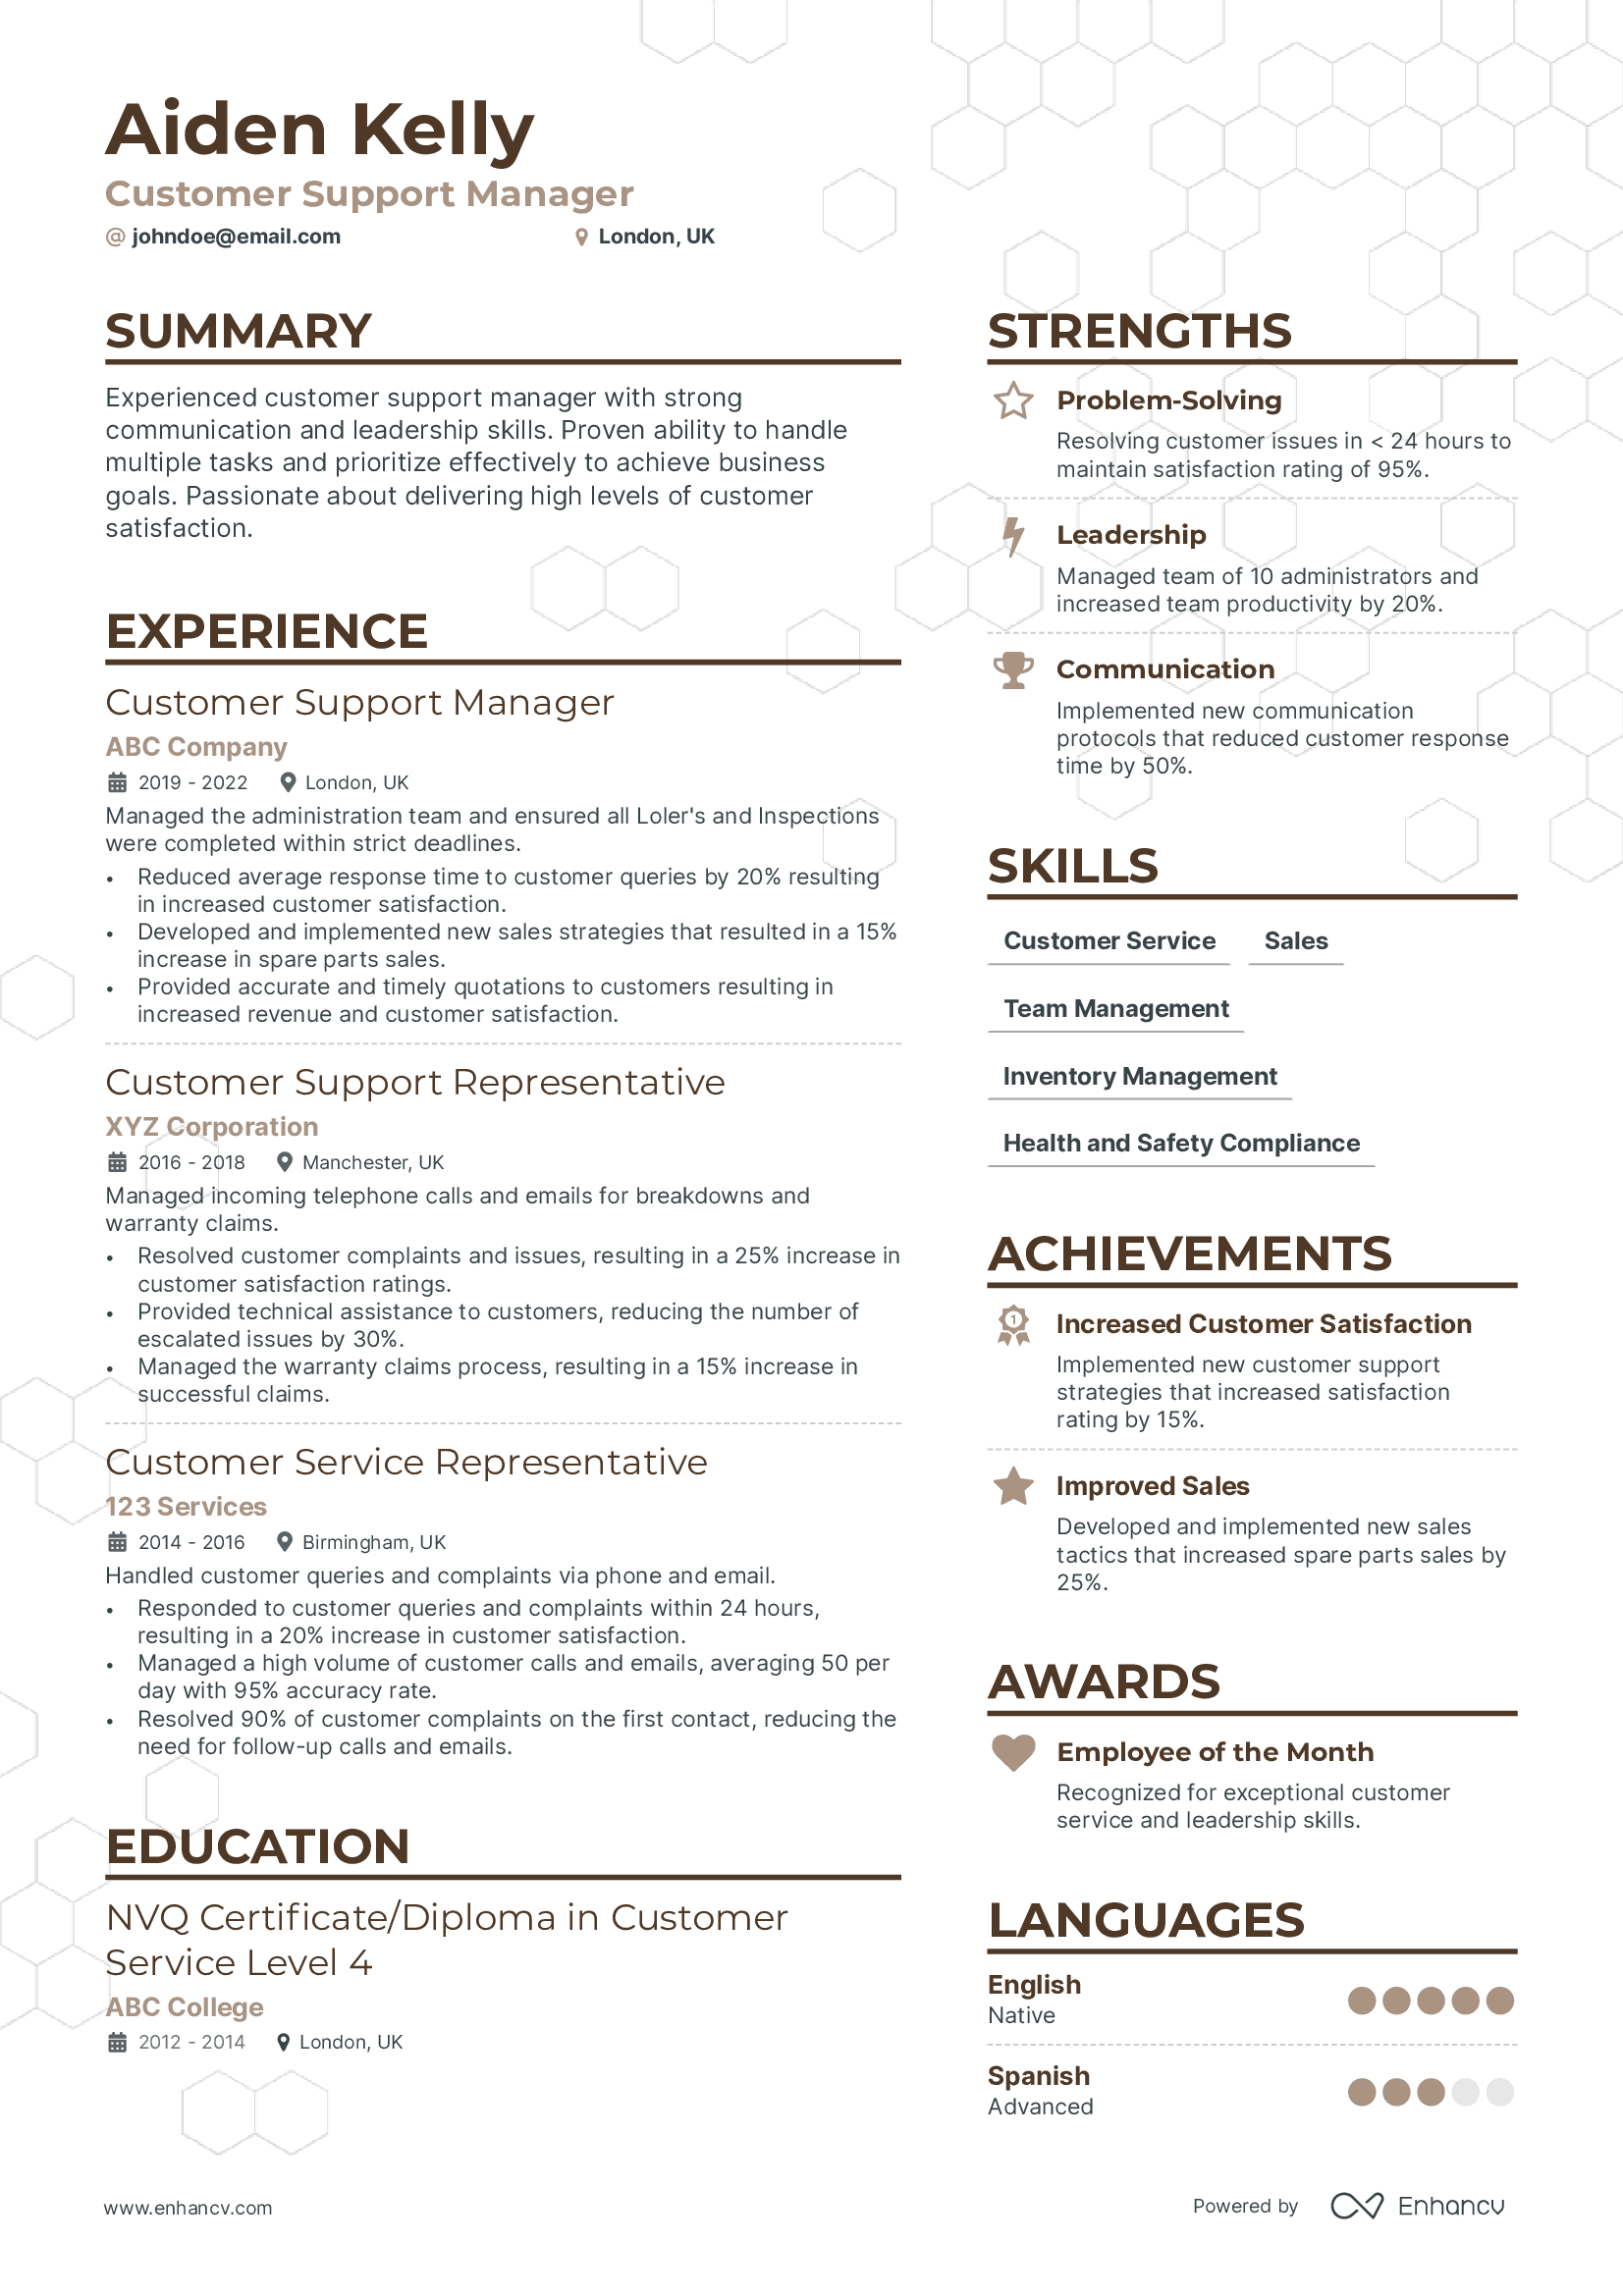 Customer Support Manager resume example